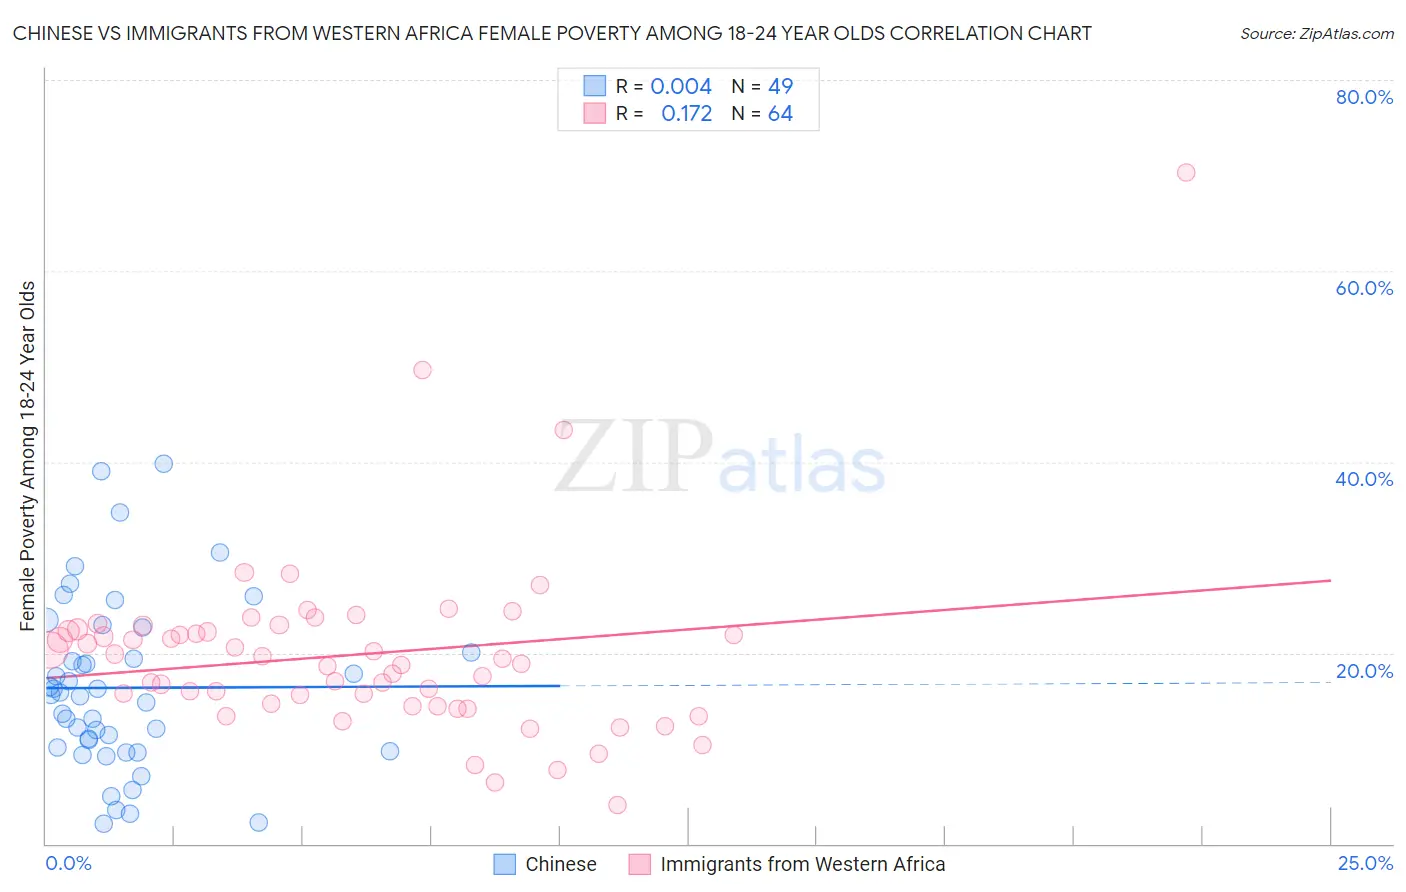 Chinese vs Immigrants from Western Africa Female Poverty Among 18-24 Year Olds